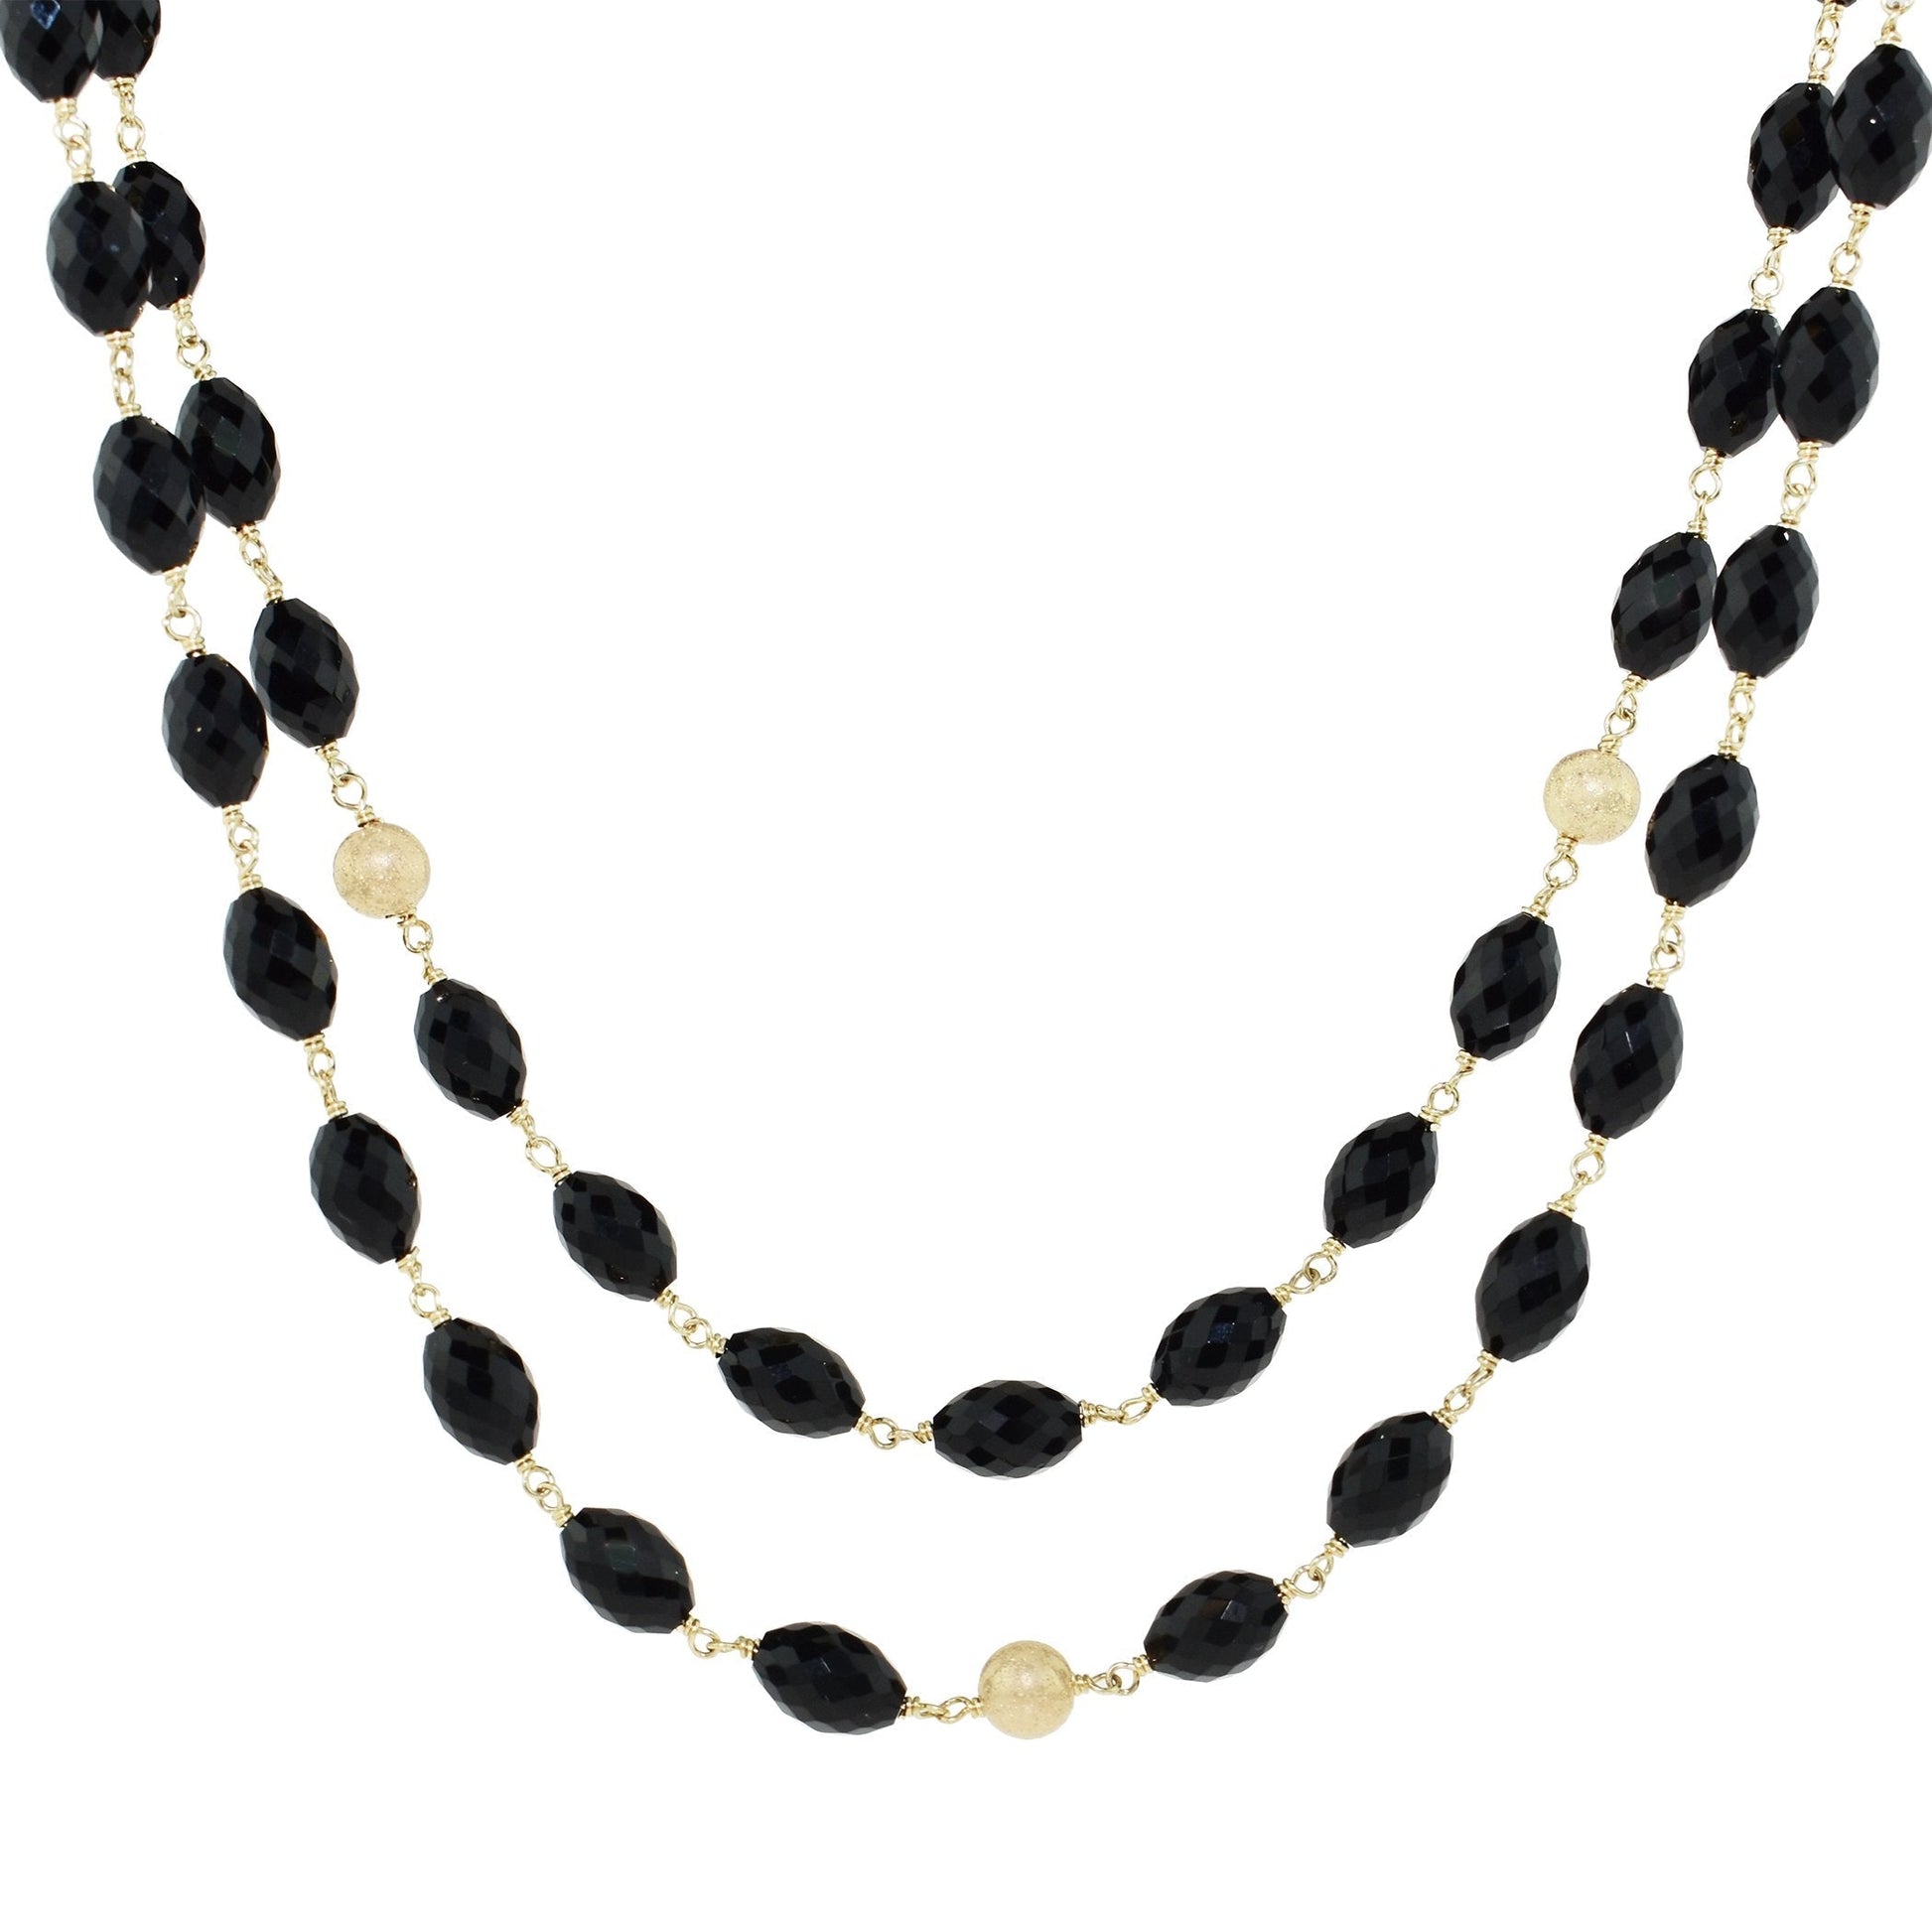 14k Faceted/Oval Black Onyx Layered 2 Row Necklace 18 to 20" freeshipping - Jewelmak Shop